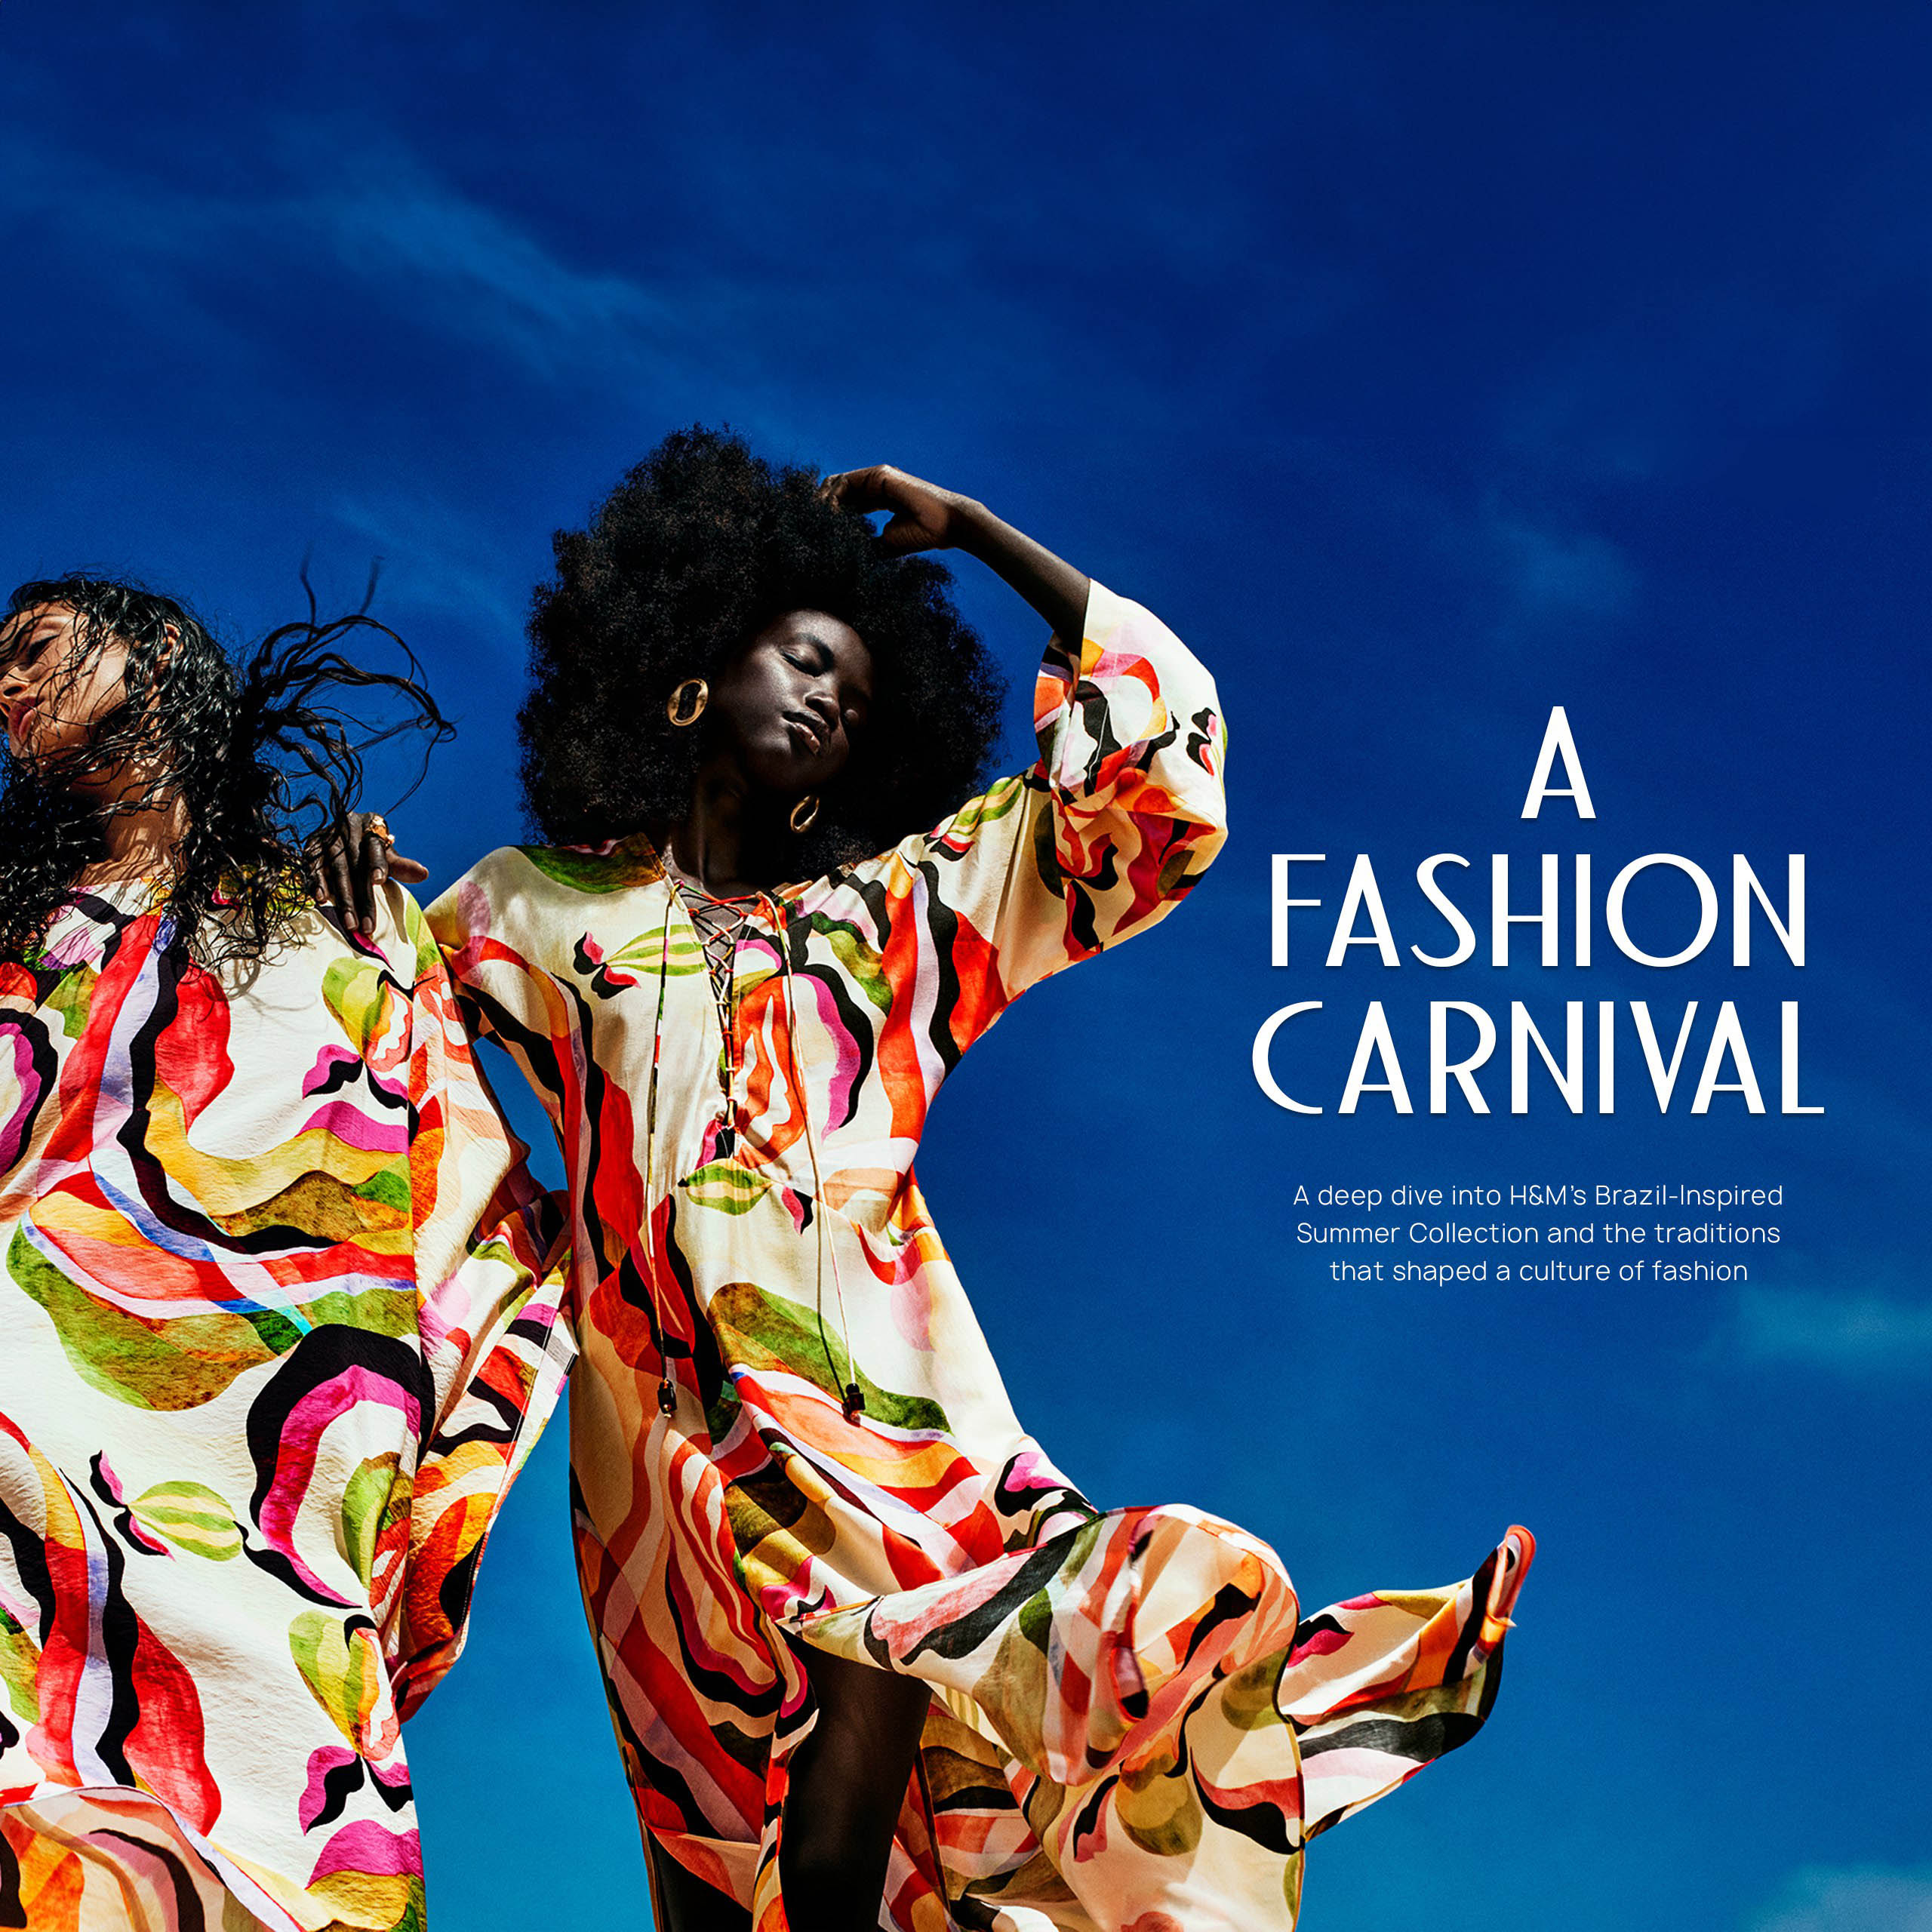 Capturing the Brazilian Spirit: A Closer Look at H&M’s Summer Collection